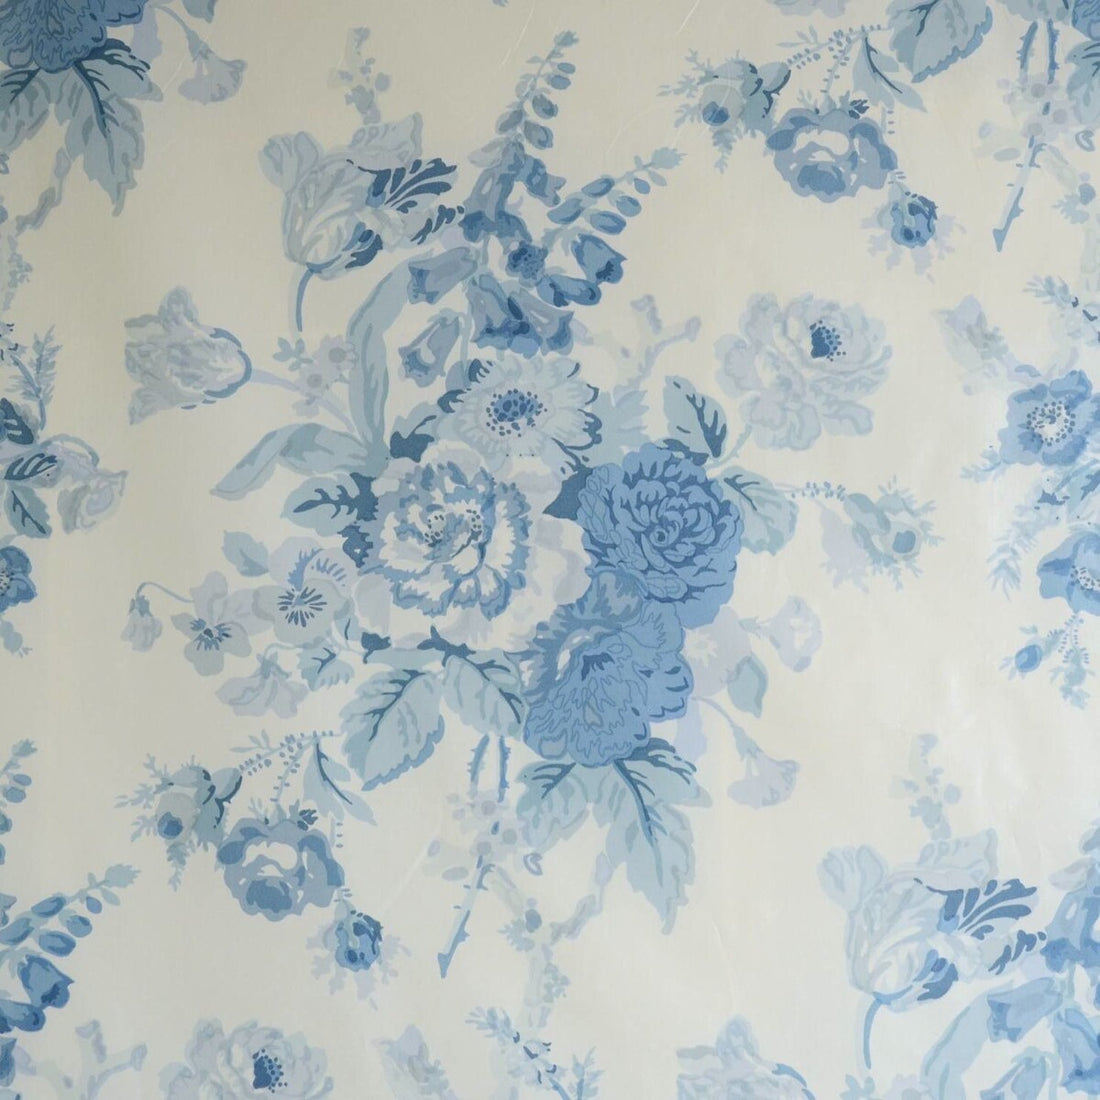 Grenville Glazed Chintz fabric in blue color - pattern BFC-3690.5.0 - by Lee Jofa in the Blithfield collection